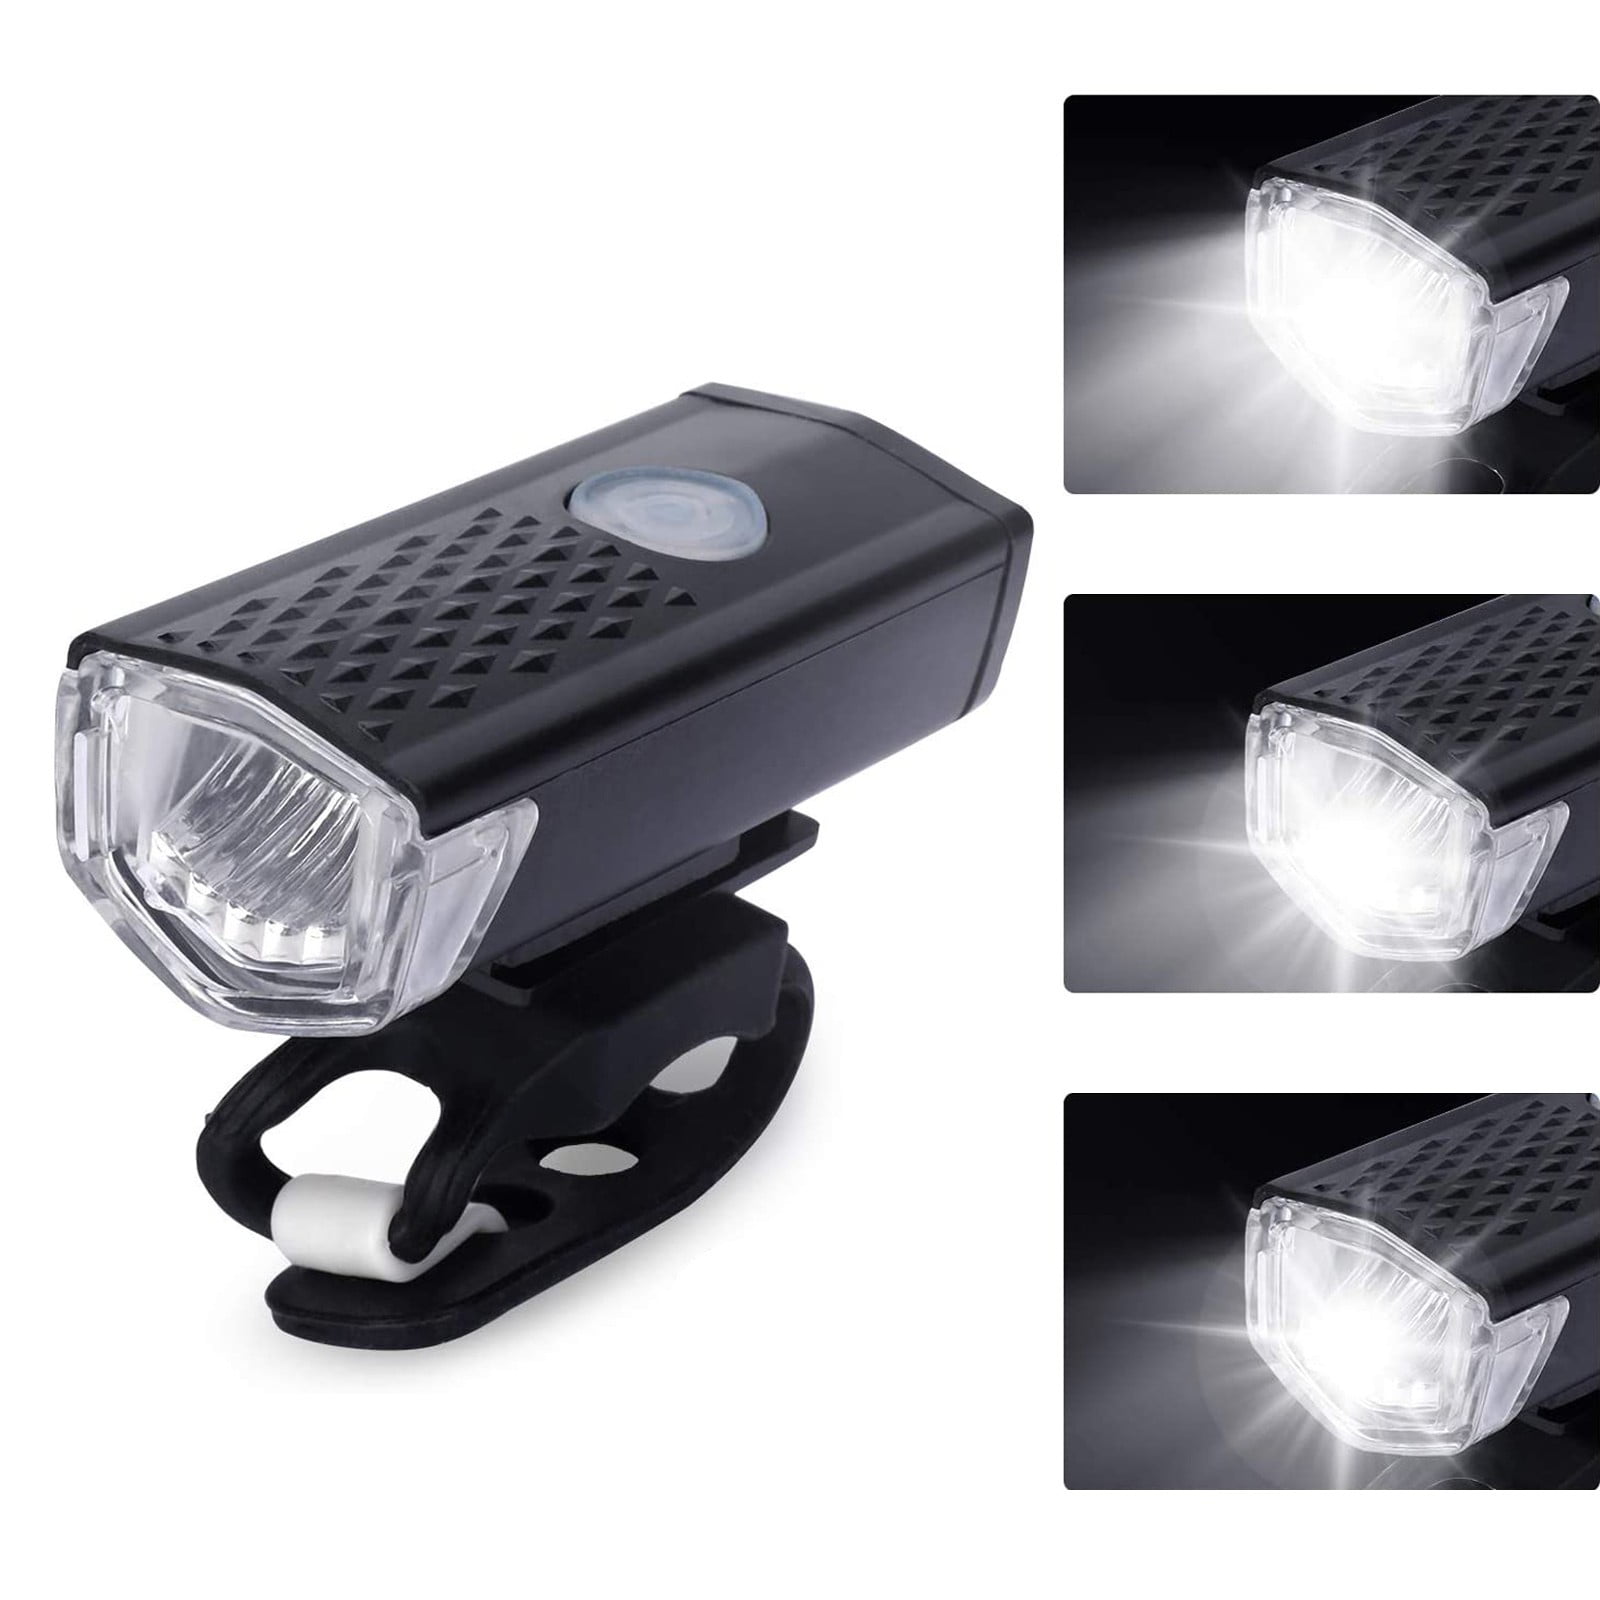 USB Rechargeable LED Bike Bicycle Cycling Headlight Front Light Tail Rear Lamp 